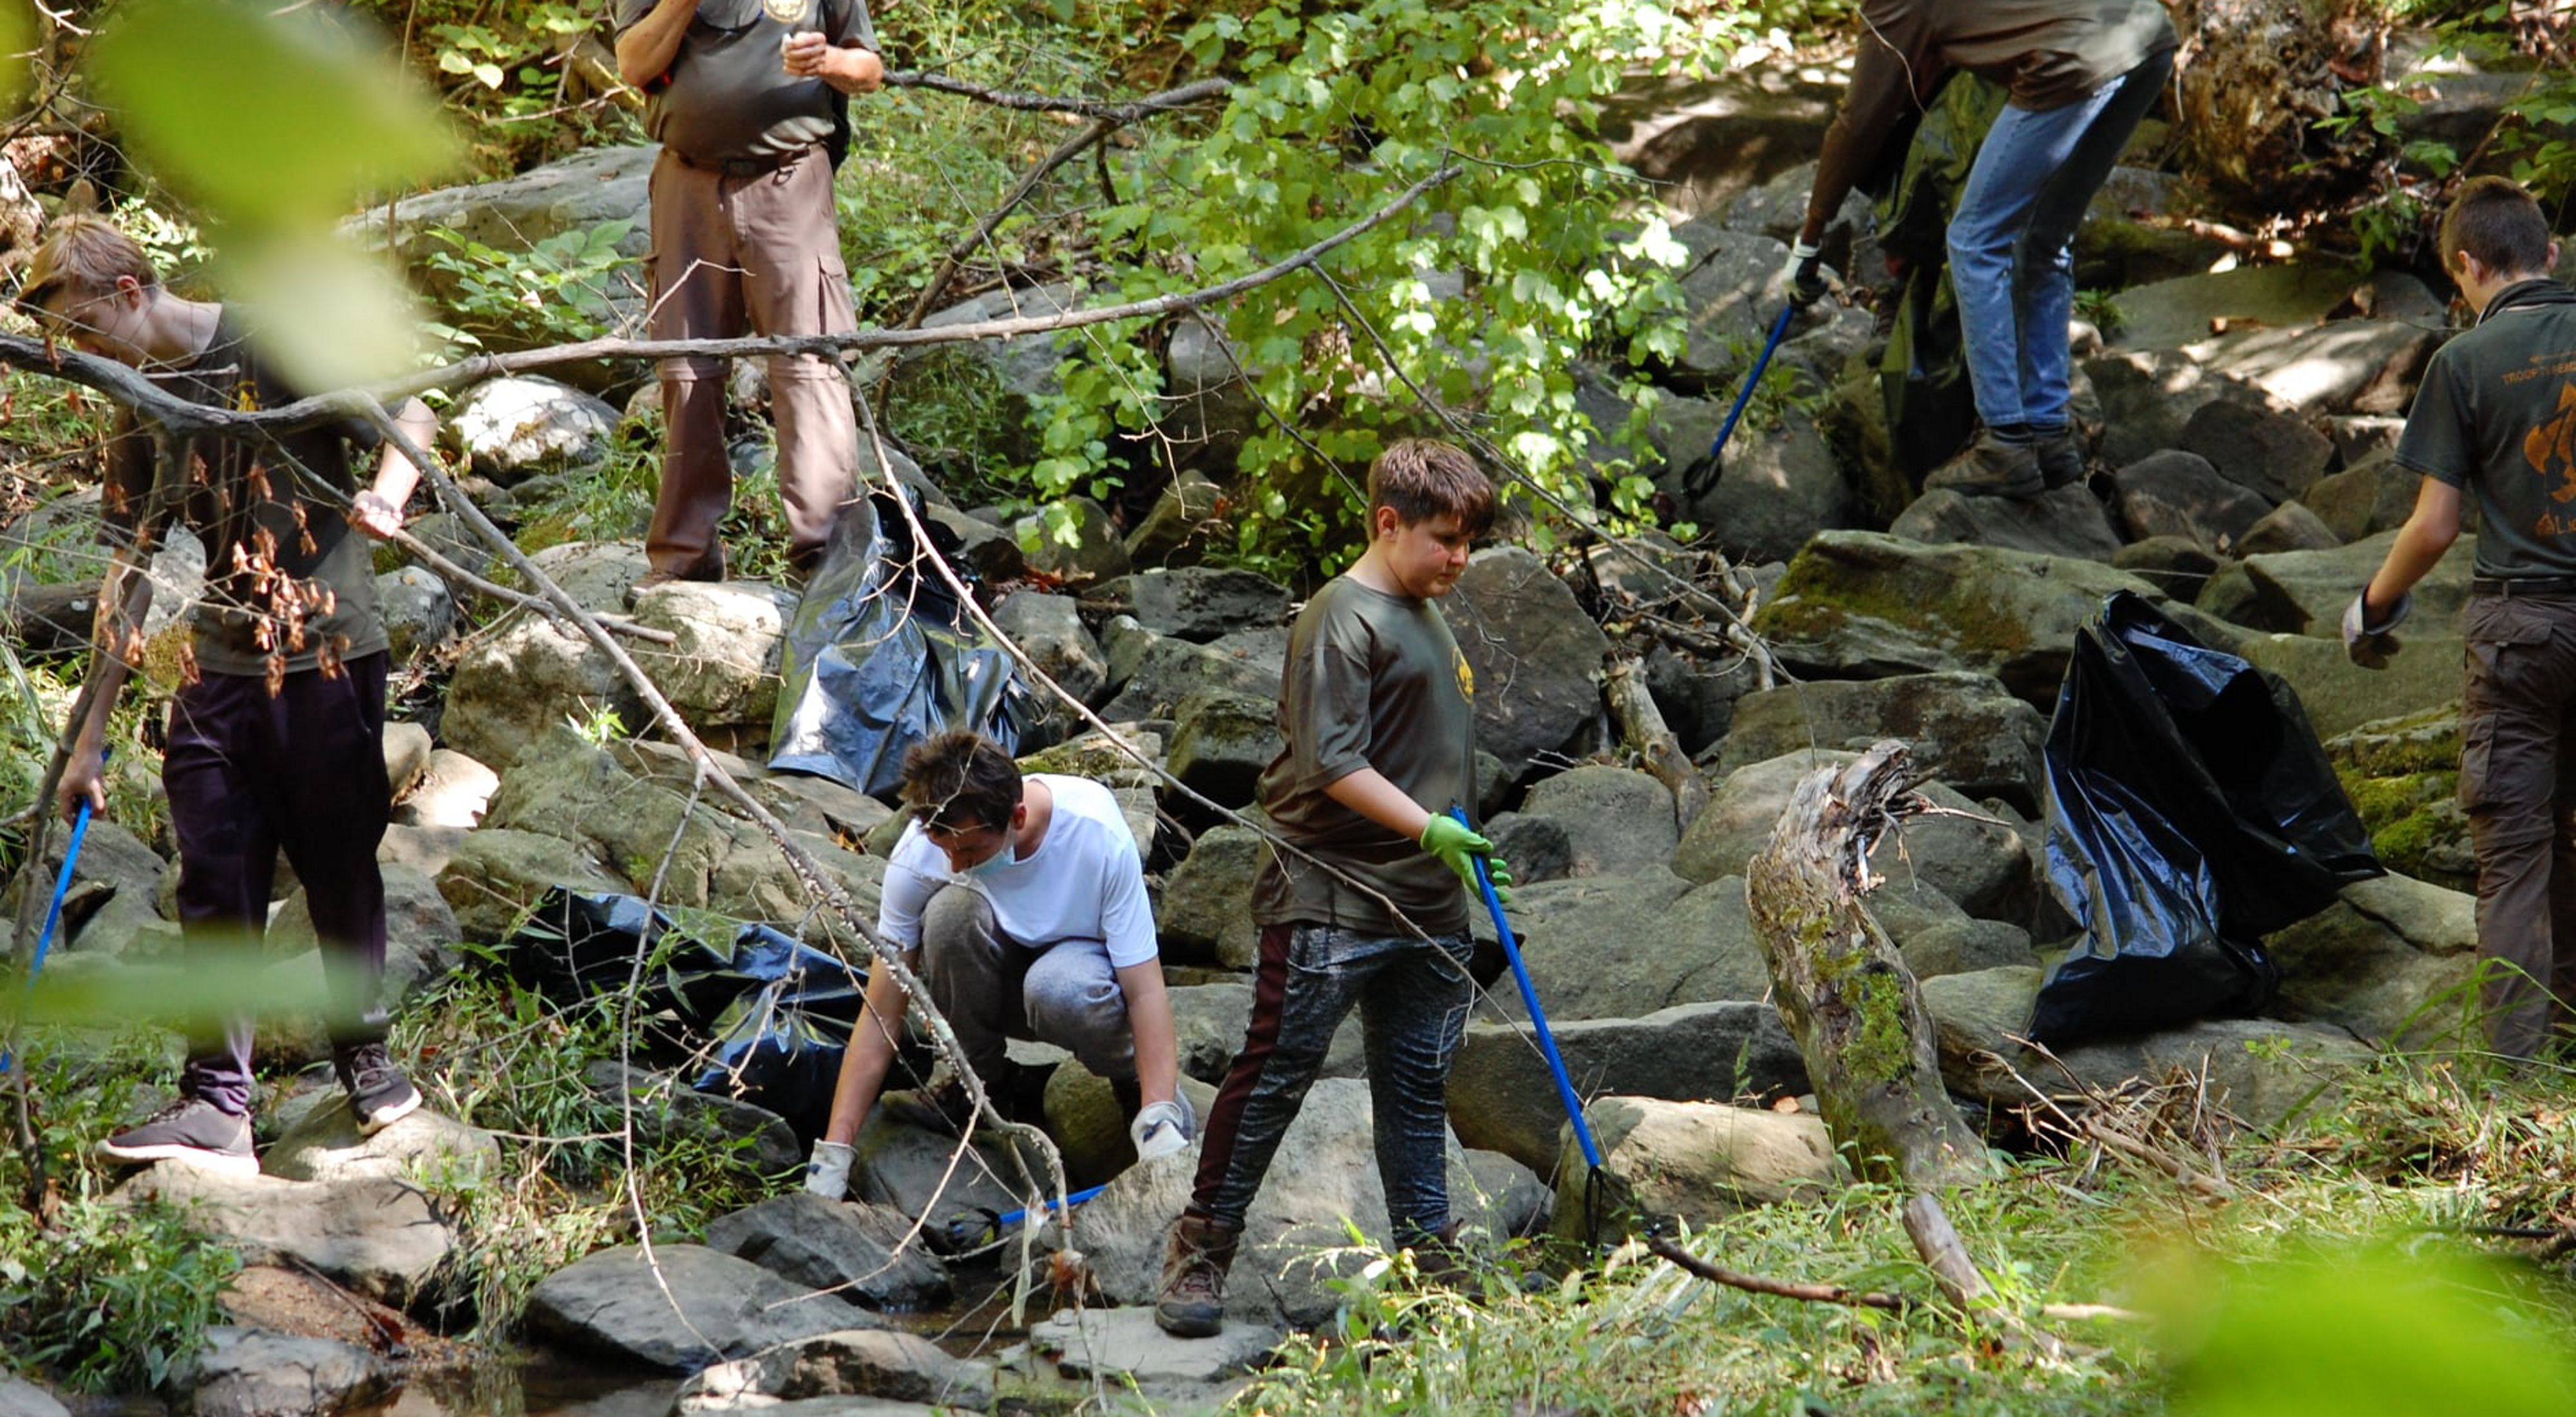 A group of adults and teens stand on rocks and boulders at the edge of a stream during a volunteer cleanup event.